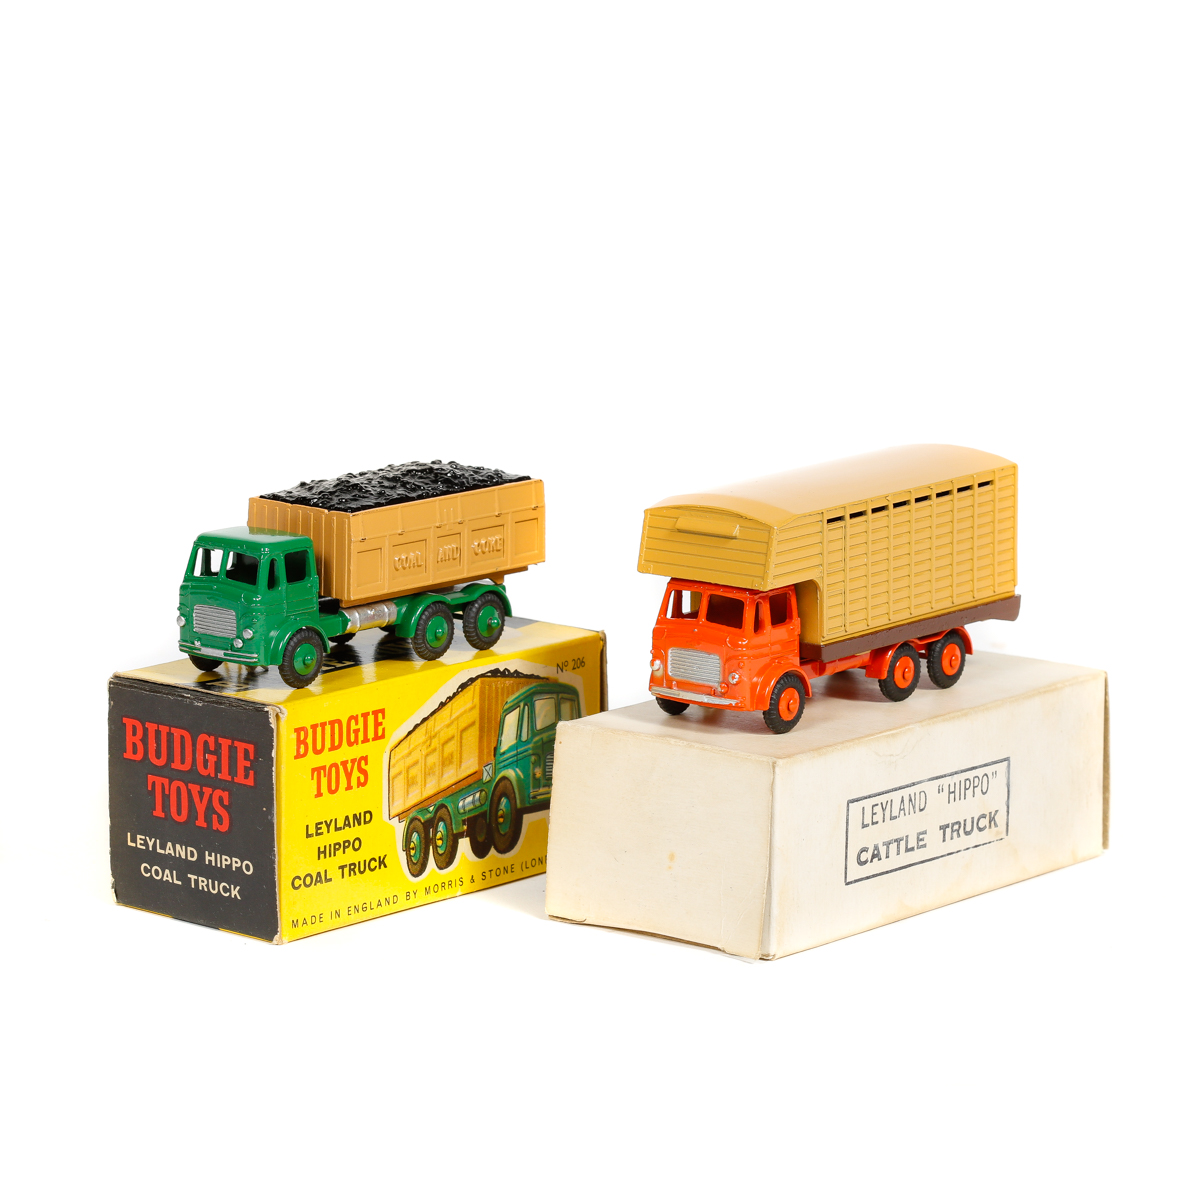 2 Budgie Toys Leyland Hippo Trucks. A Coal Truck (206) in green and brown. Together with a Cattle